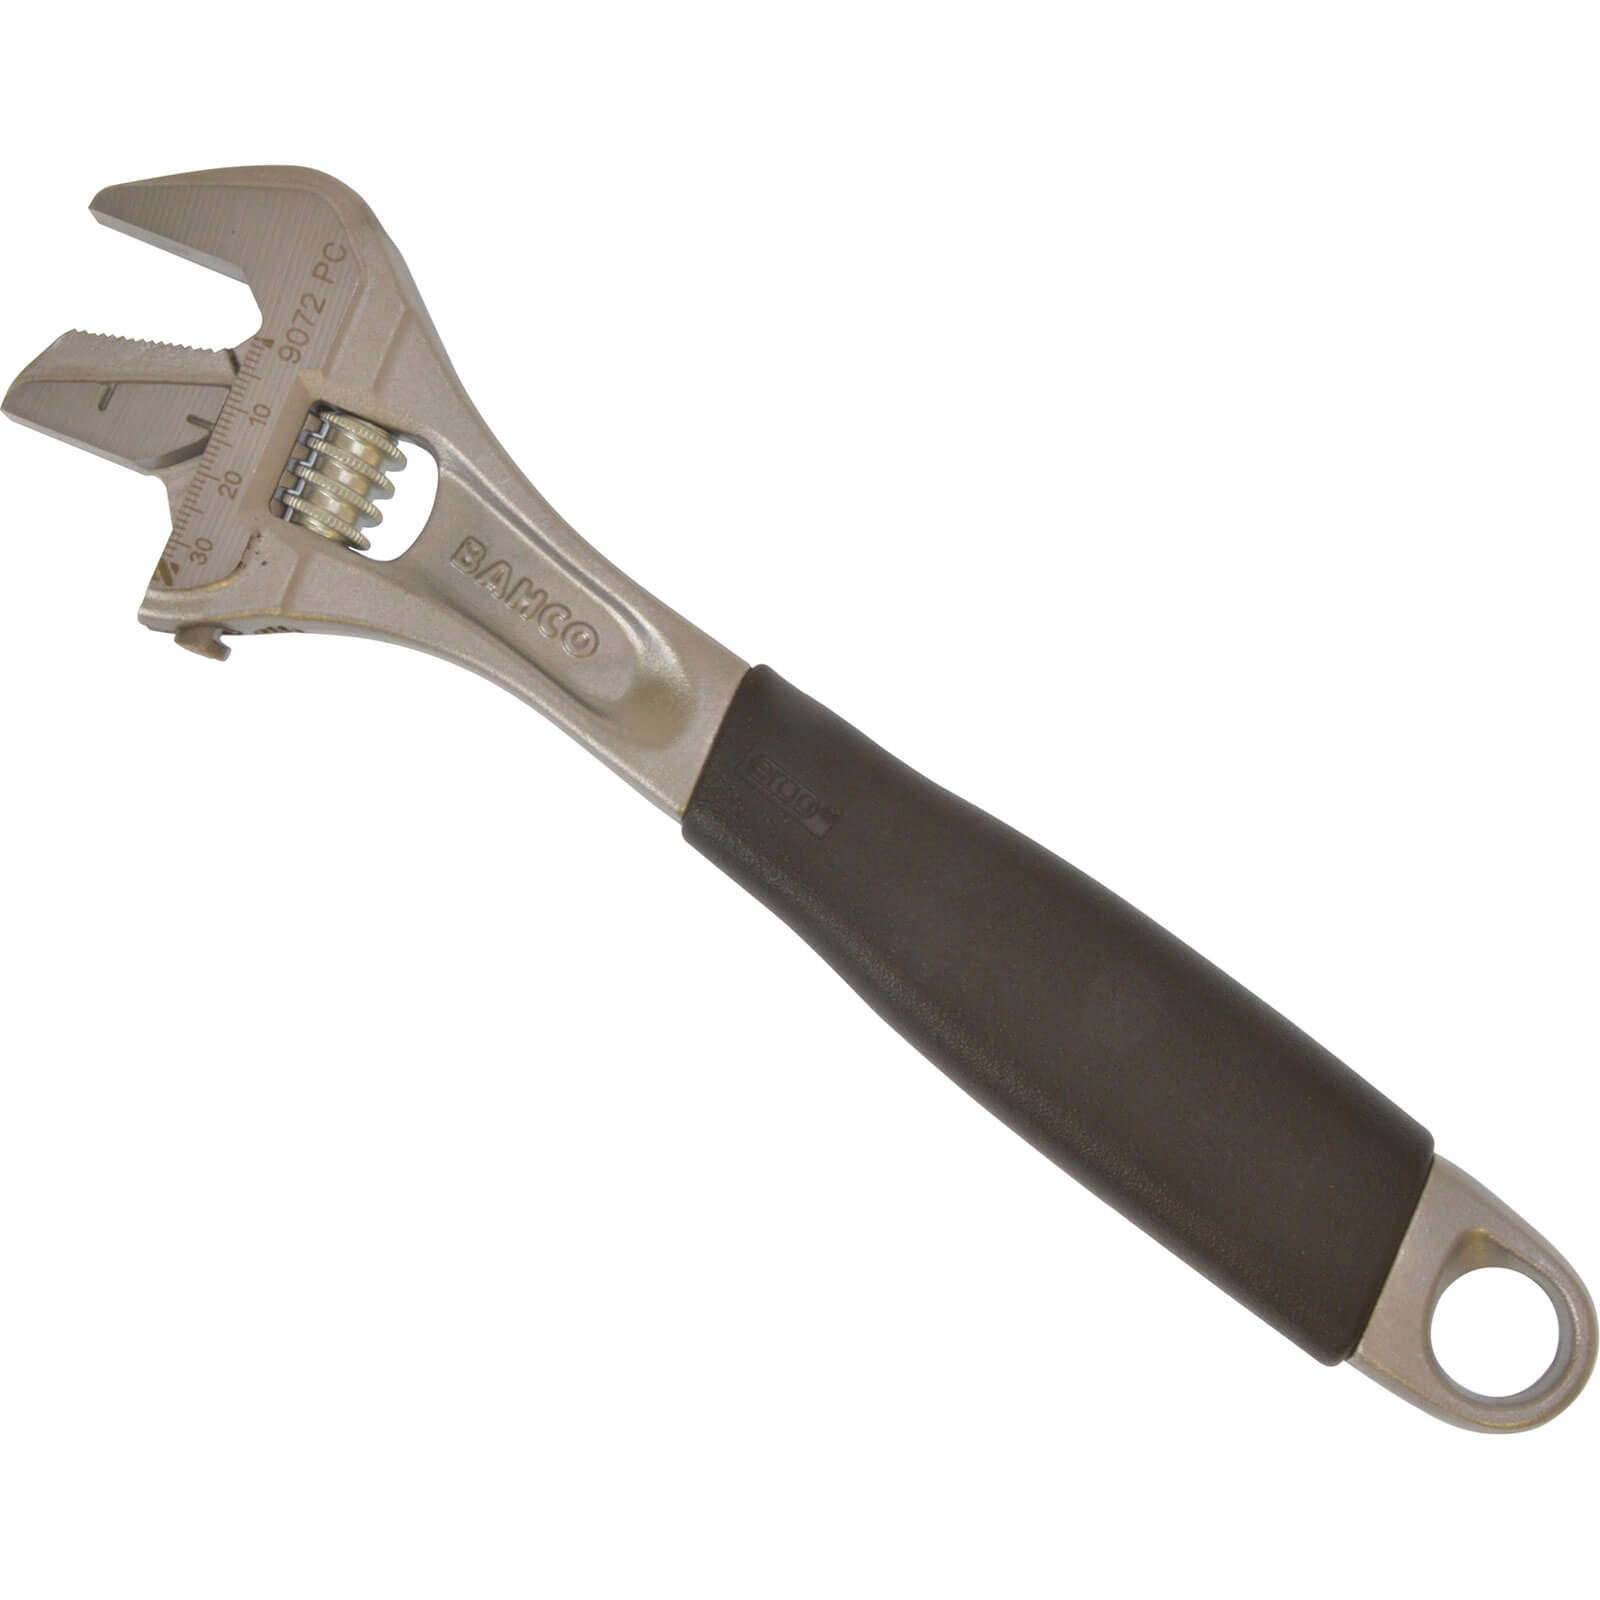 Bahco 90 Series Ergo Adjustable Spanner Reversible Jaw 300mm